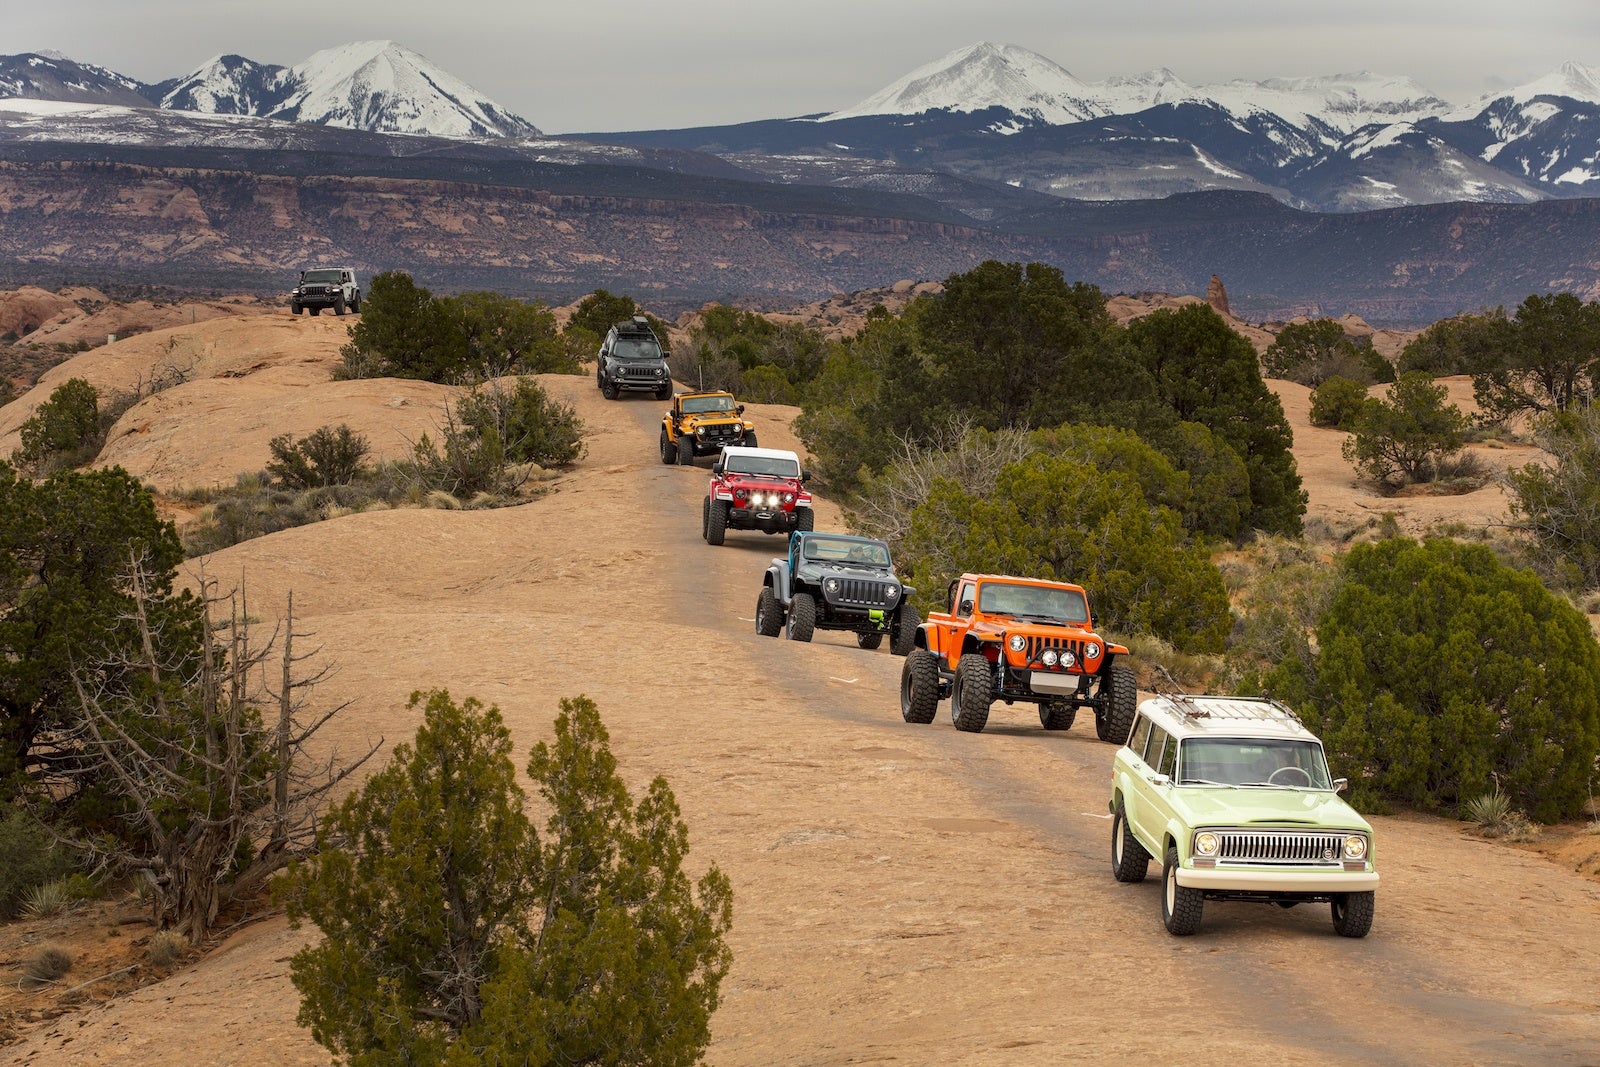 Gallery 2018 Easter Jeep Safari Concepts Climb the Rocks of Moab Off